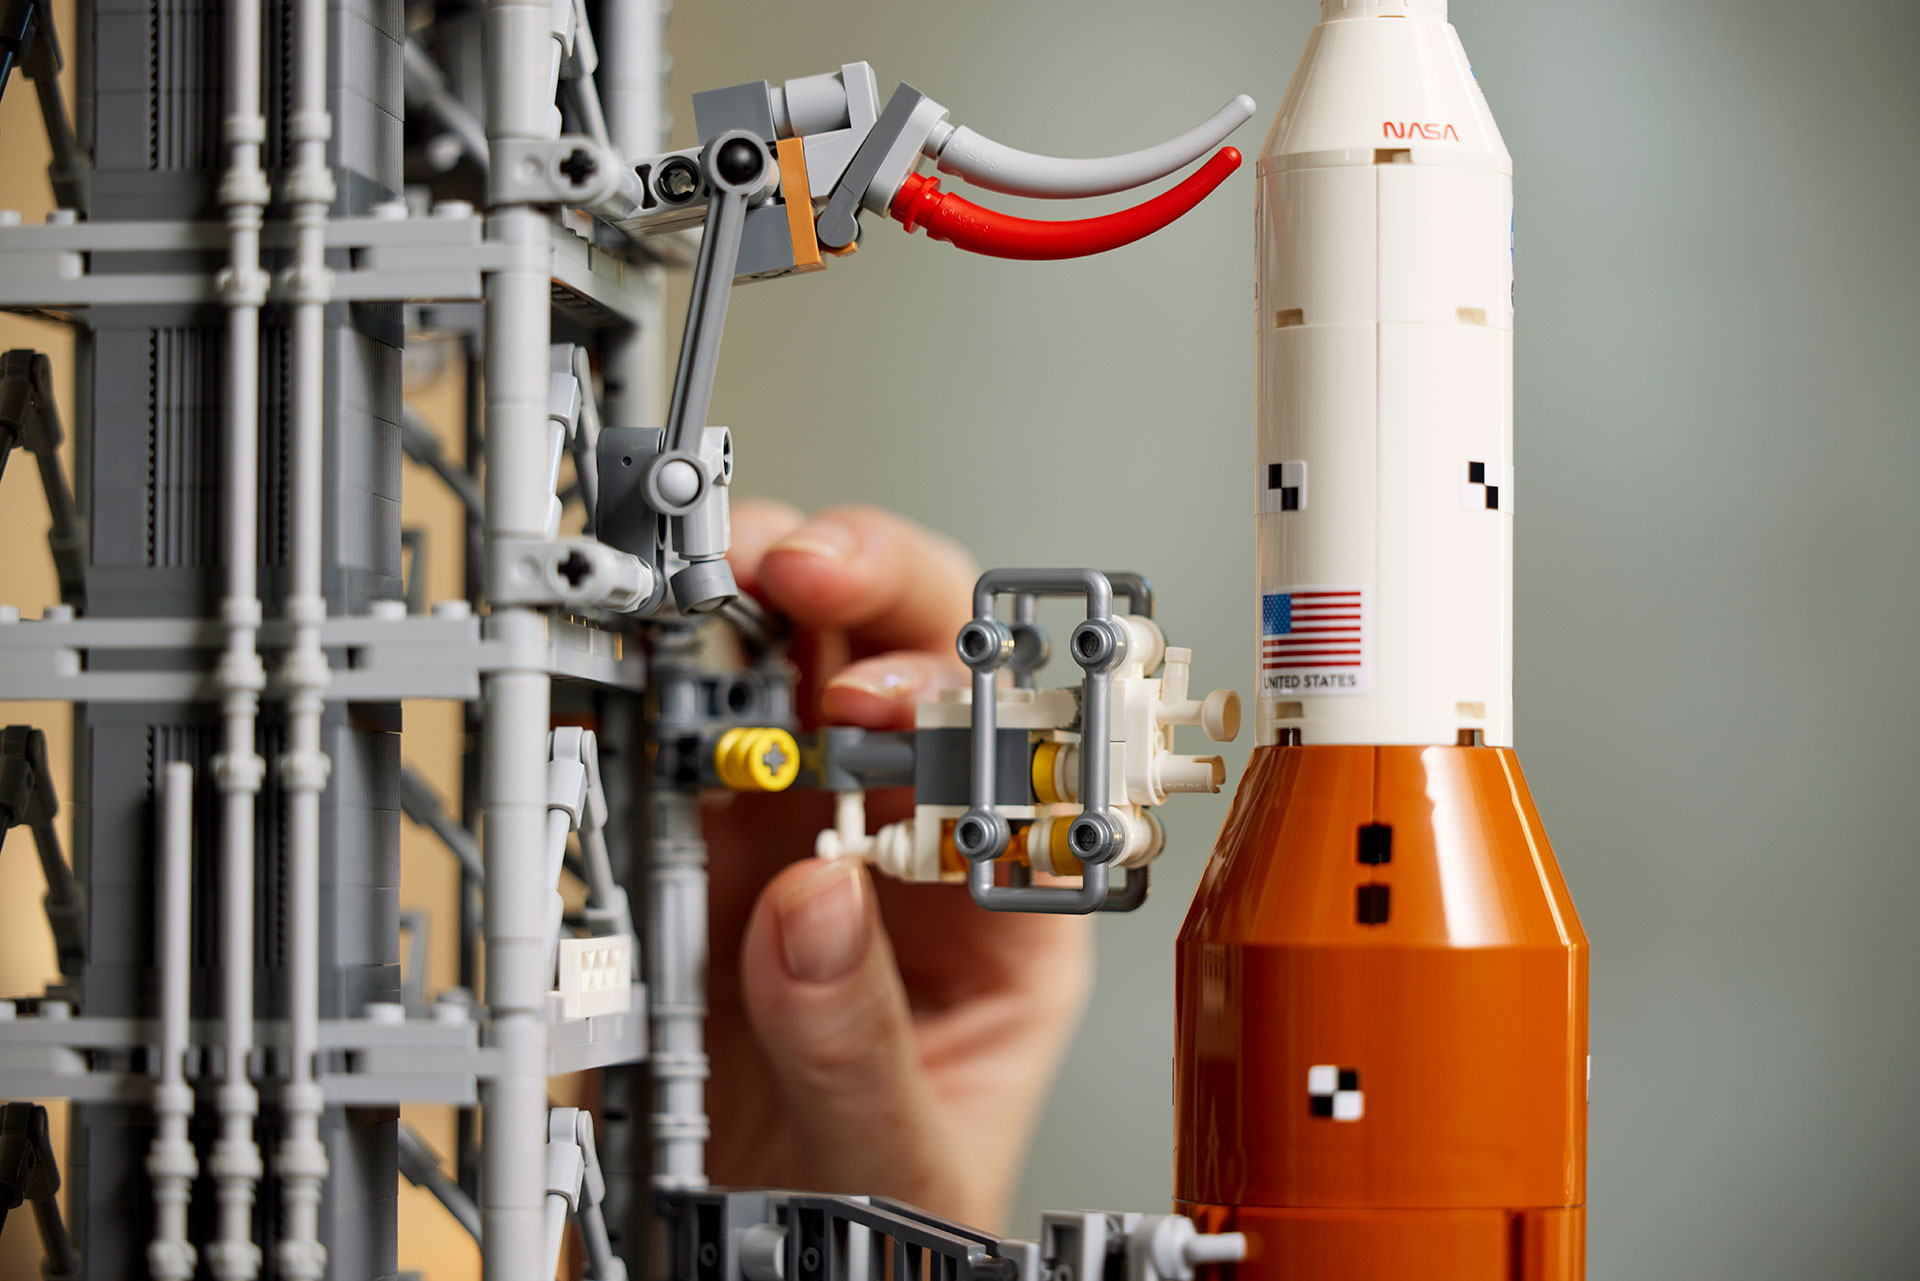 In addition to reproducing the rocket, the Lego Icons NASA Artemis Space Launch System also builds the mobile tower with retractable umbilicals and crew access arm.